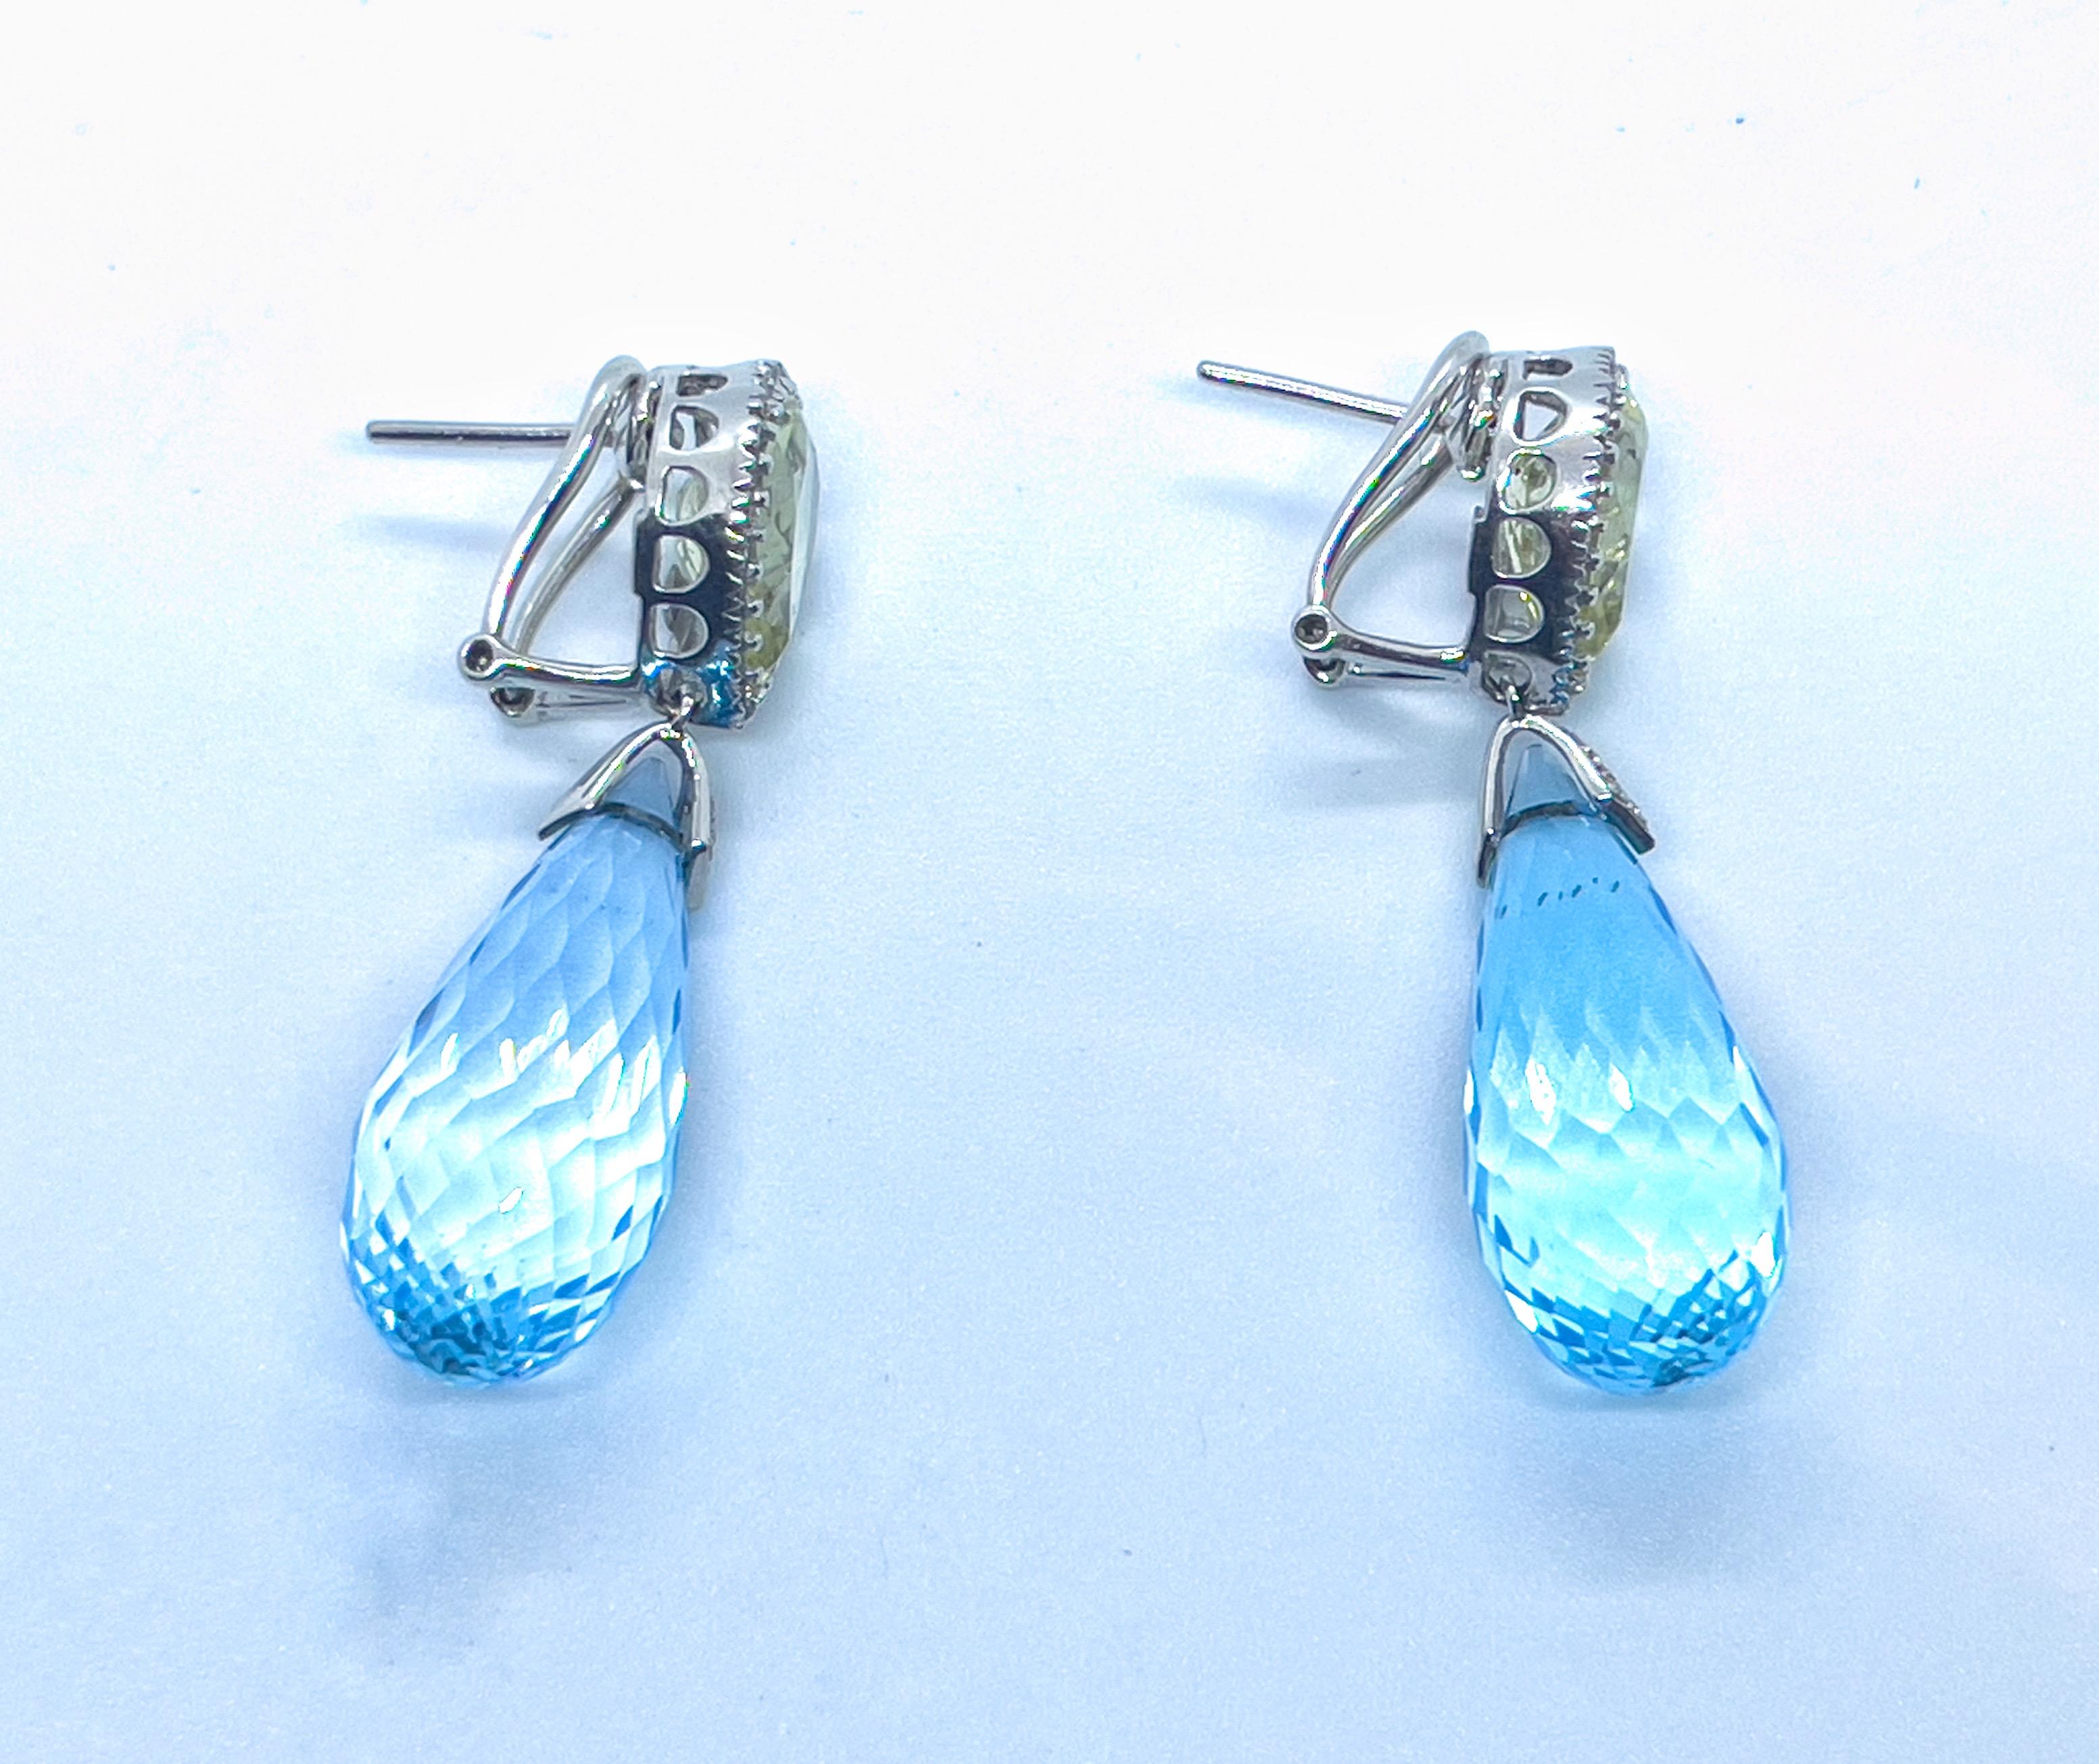 Stunning Blue Topaz and Lemon quartz earrings. The stones are surrounded by round-cut white diamonds. The earrings are made of 18K white gold. Each topaz weighs approximately 14 carats.

breath taking experience. not flashy, but it showed you mental